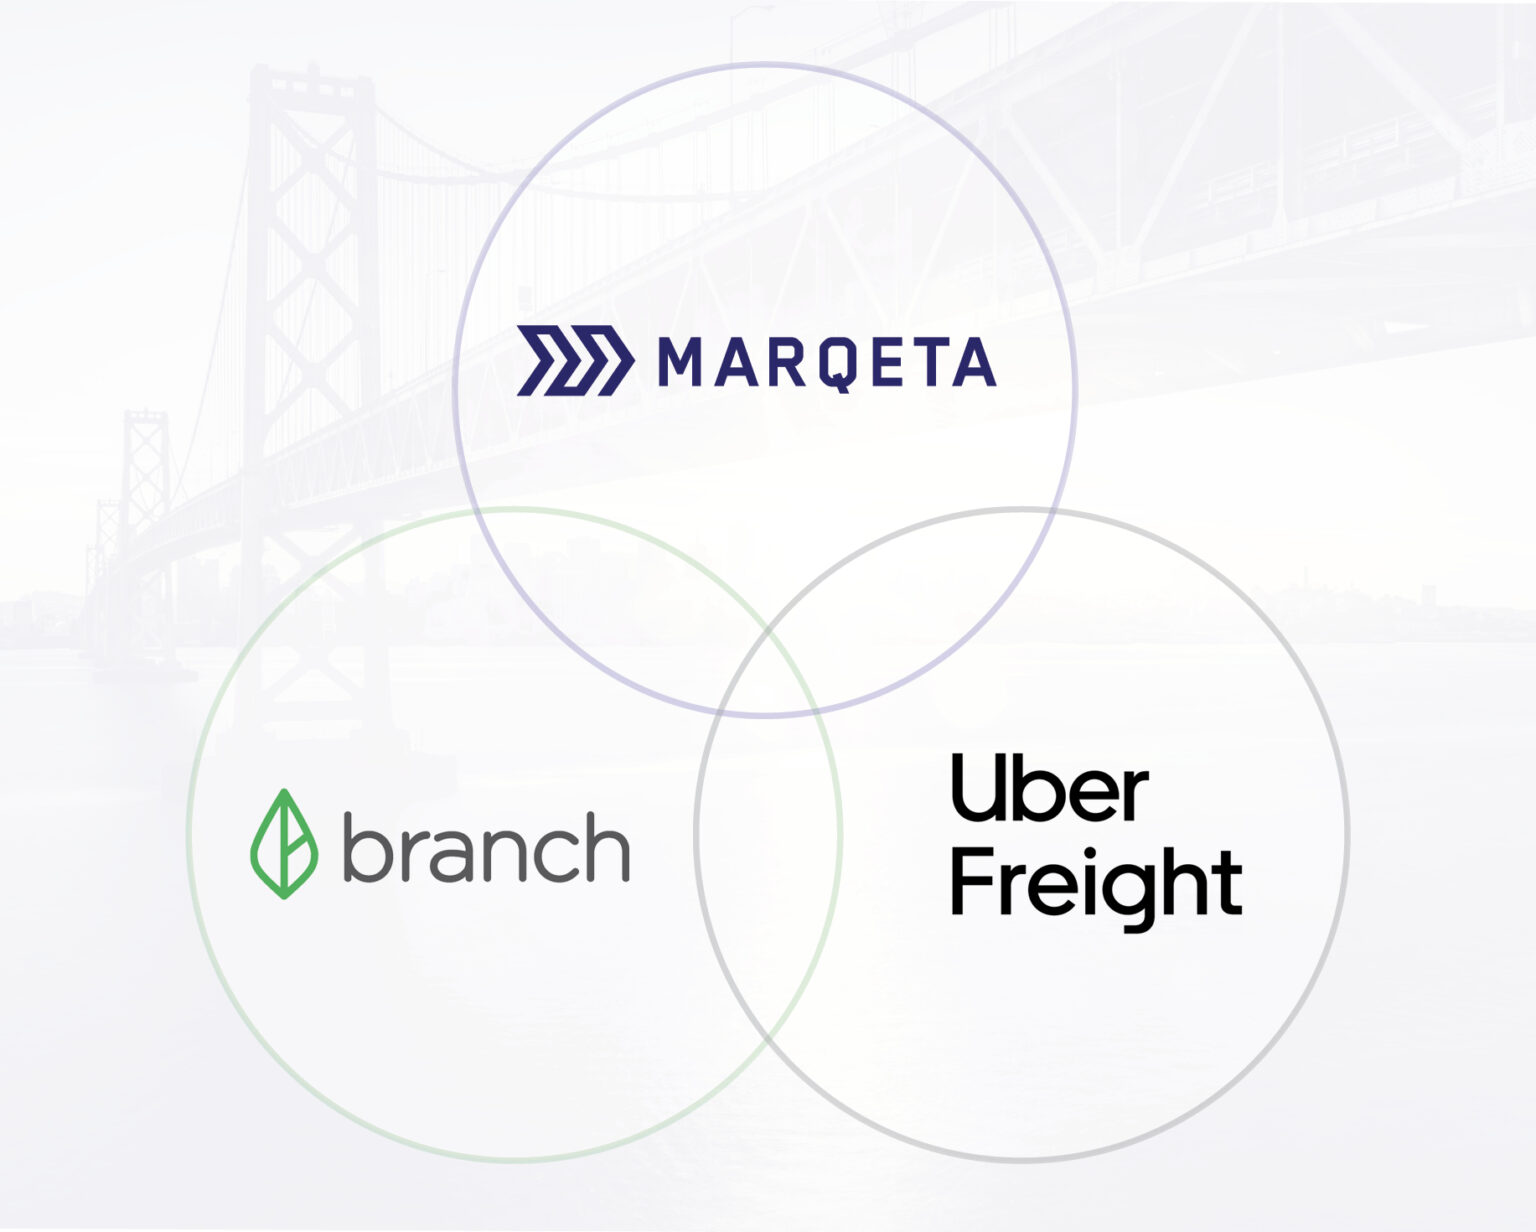 Marqeta and Branch partner with Uber Freight